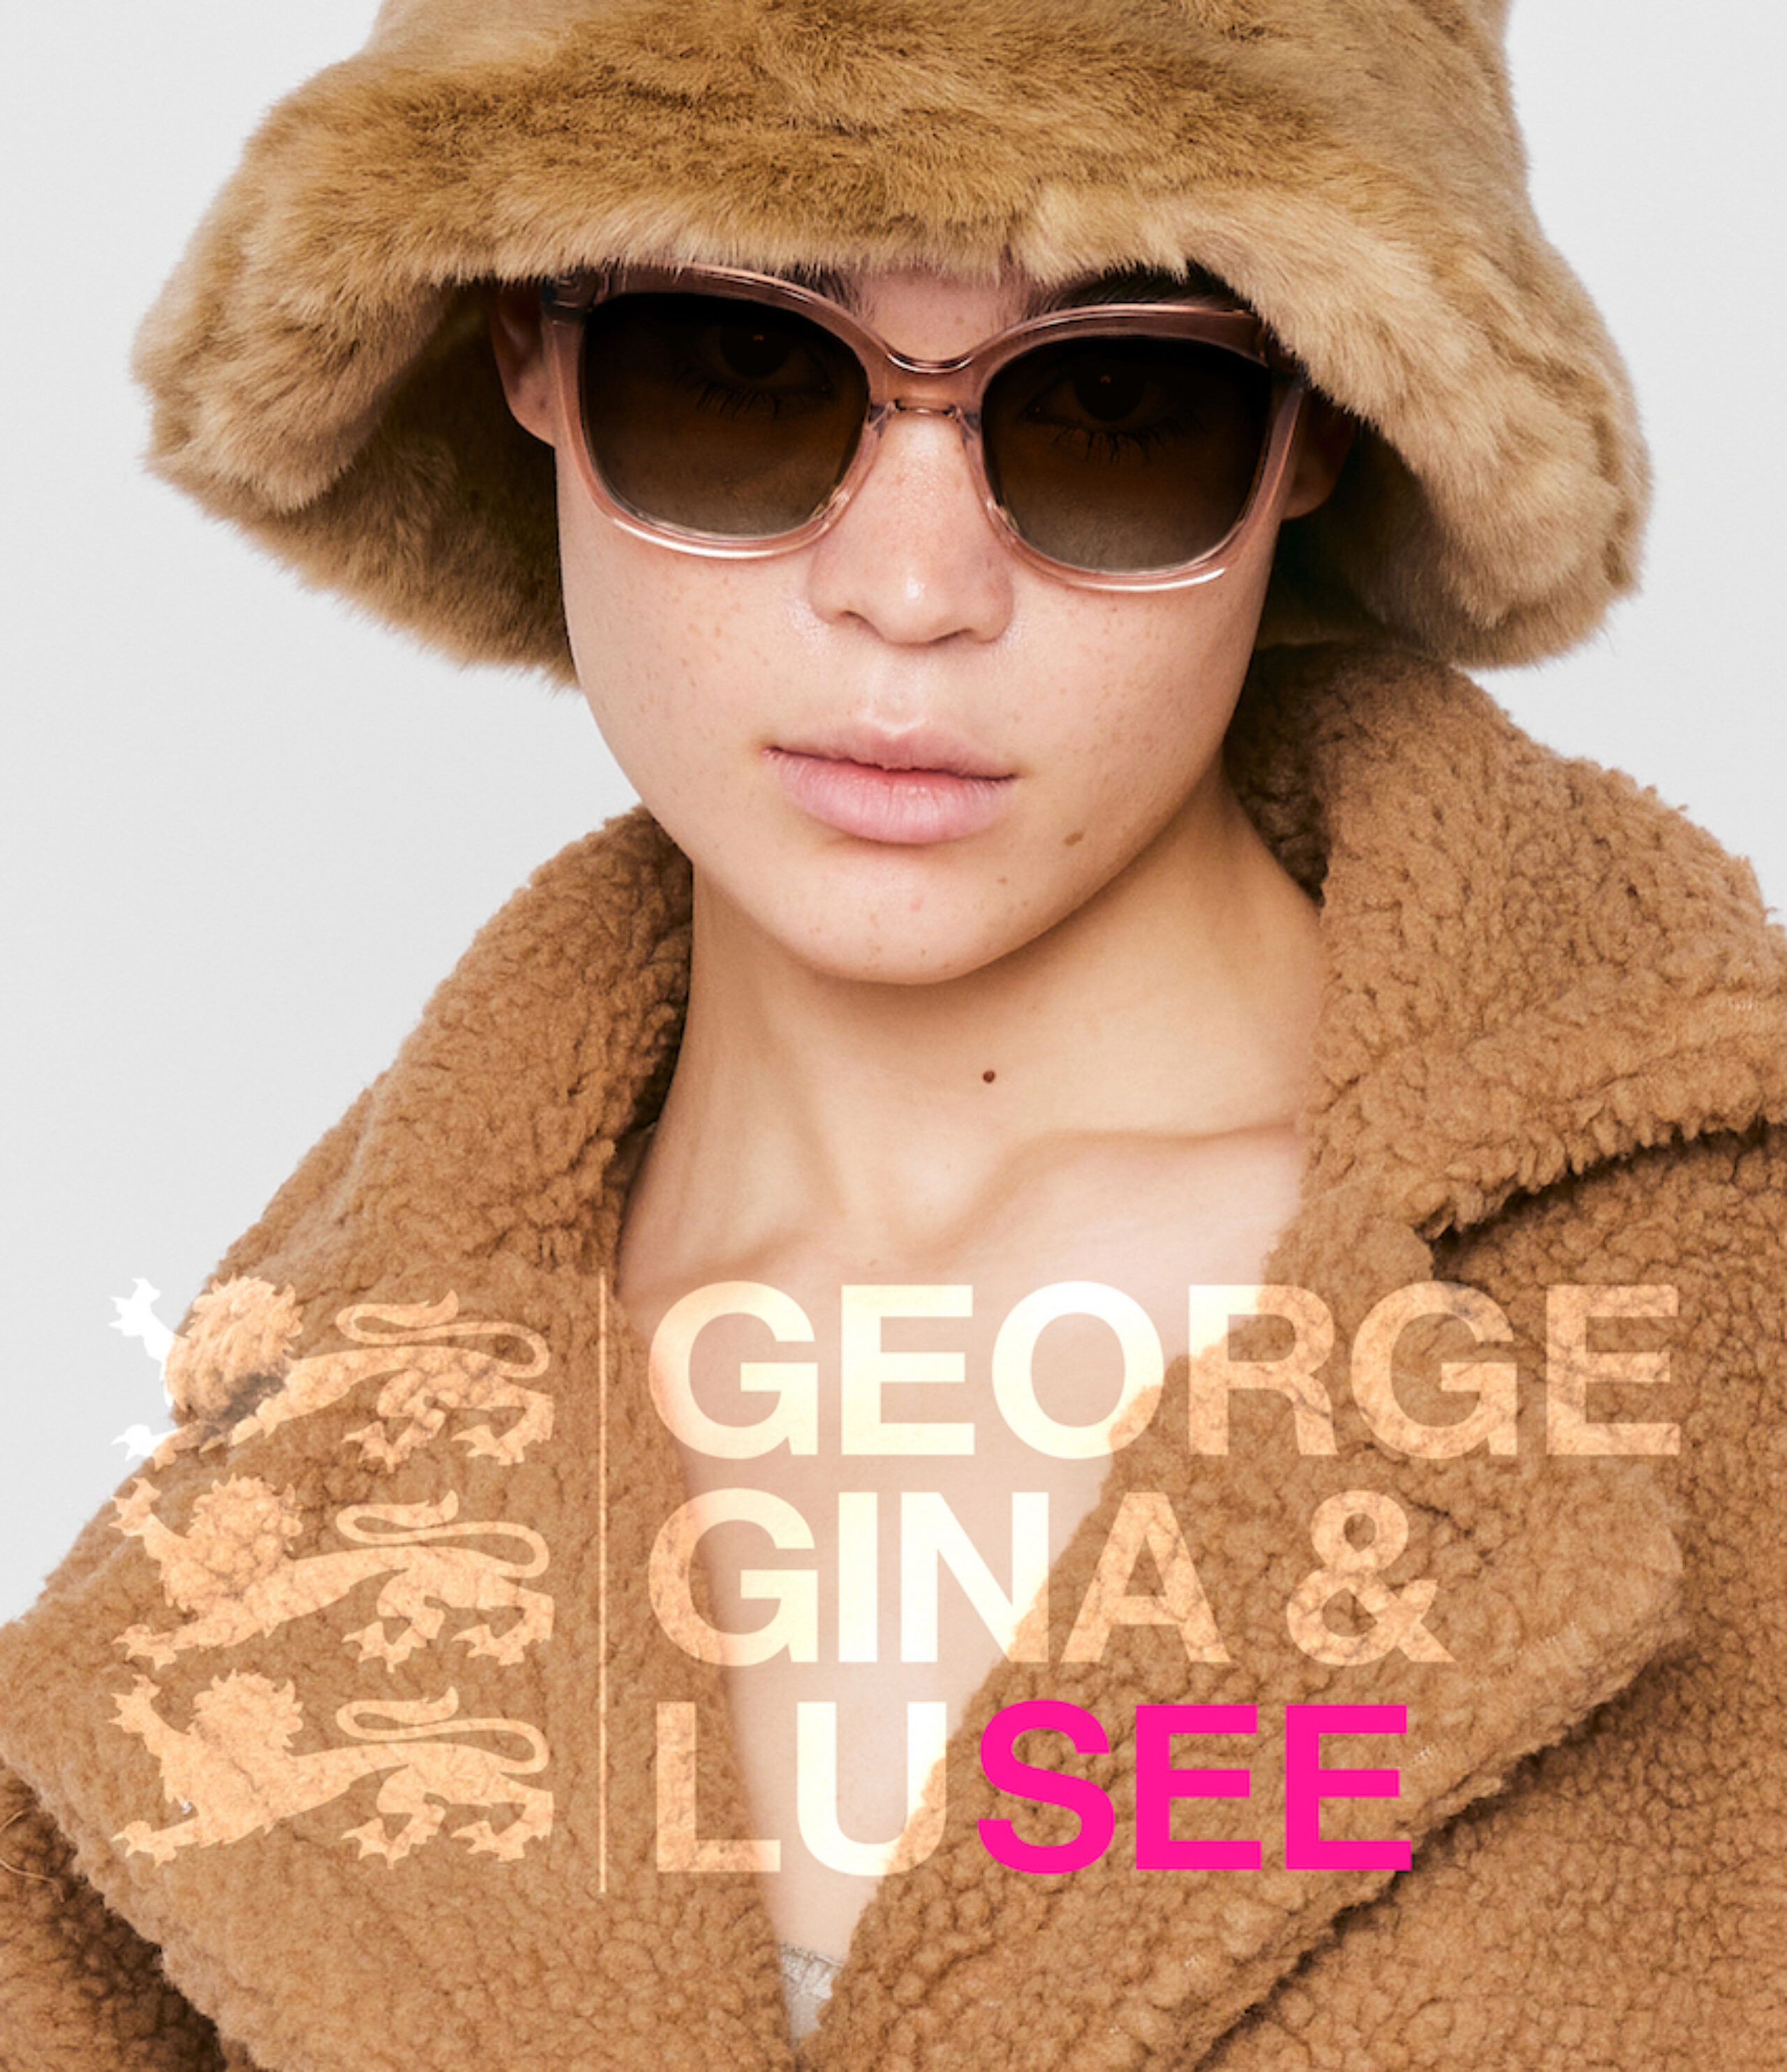 George Gina en Lucy %%sep%% Frames and Faces %%sep%% Deinze